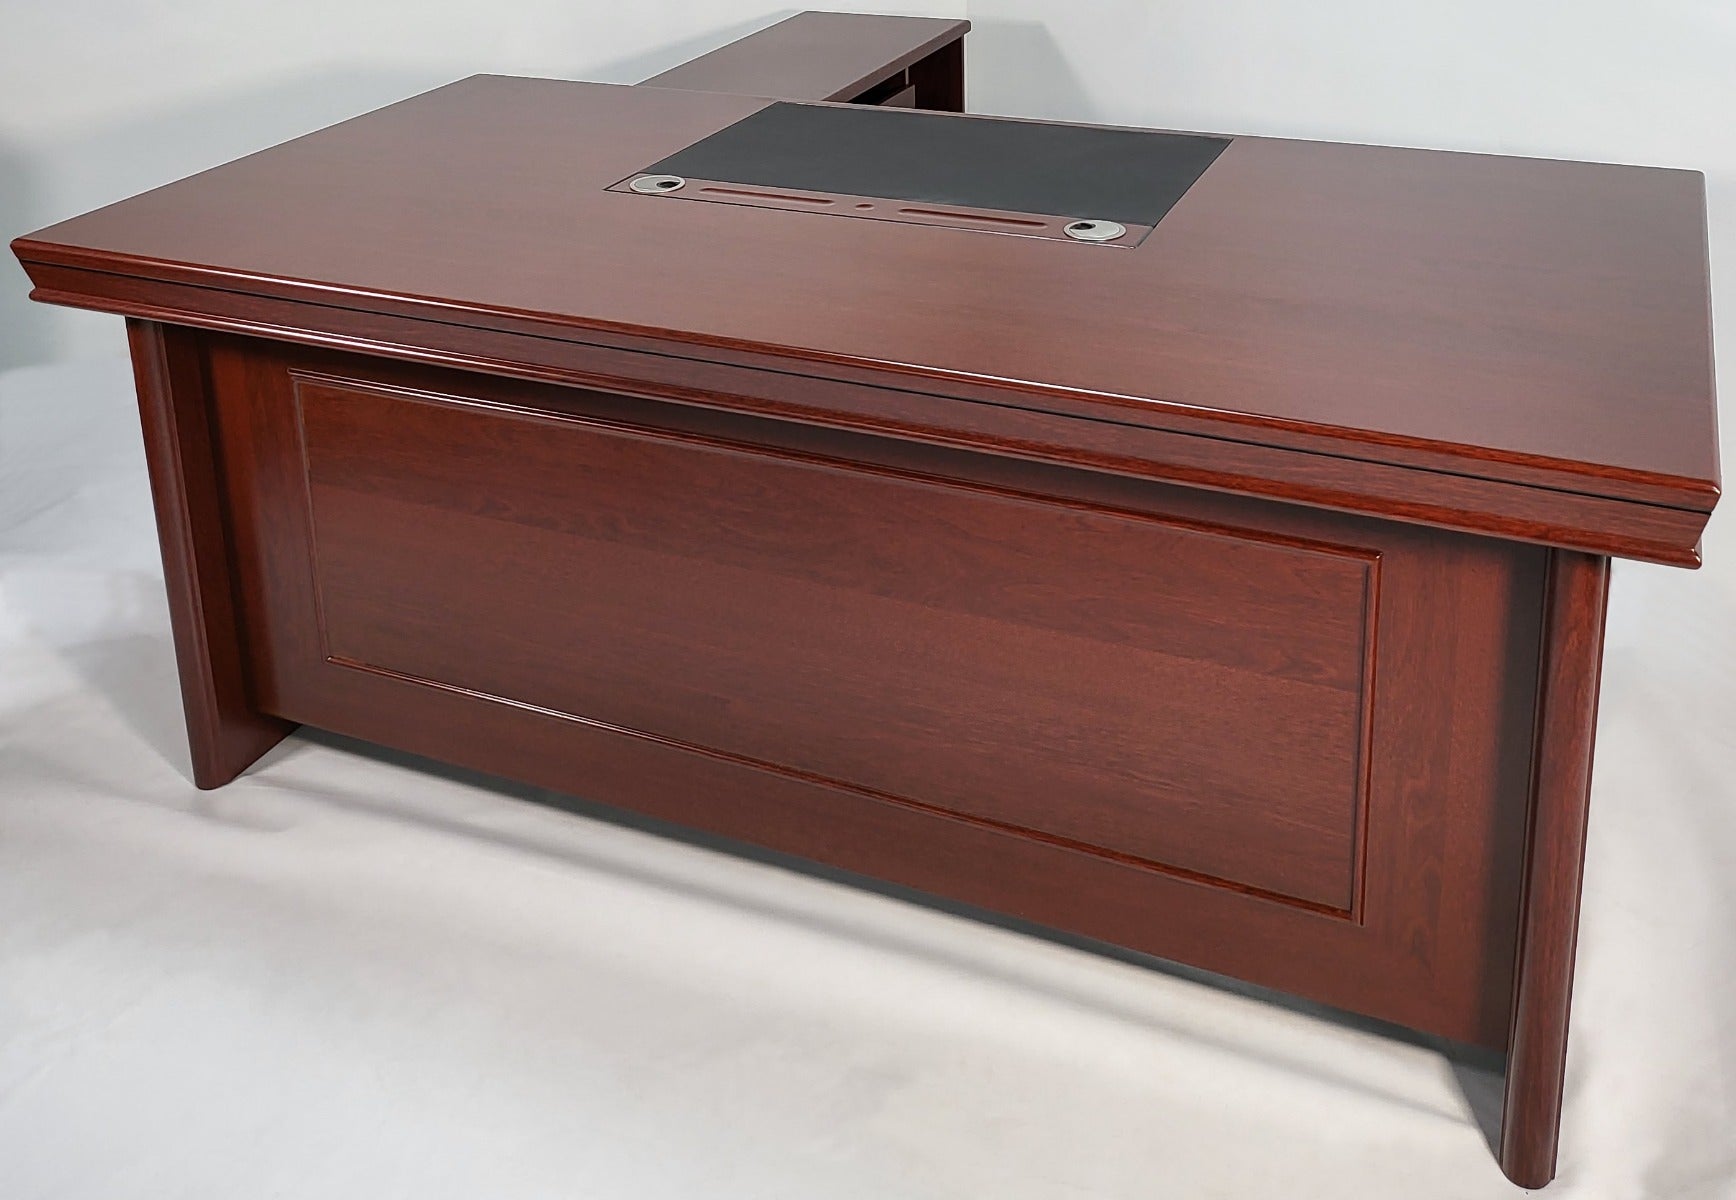 Mahogany Executive Office Desk with Pedestal and Return - 1830 Huddersfield